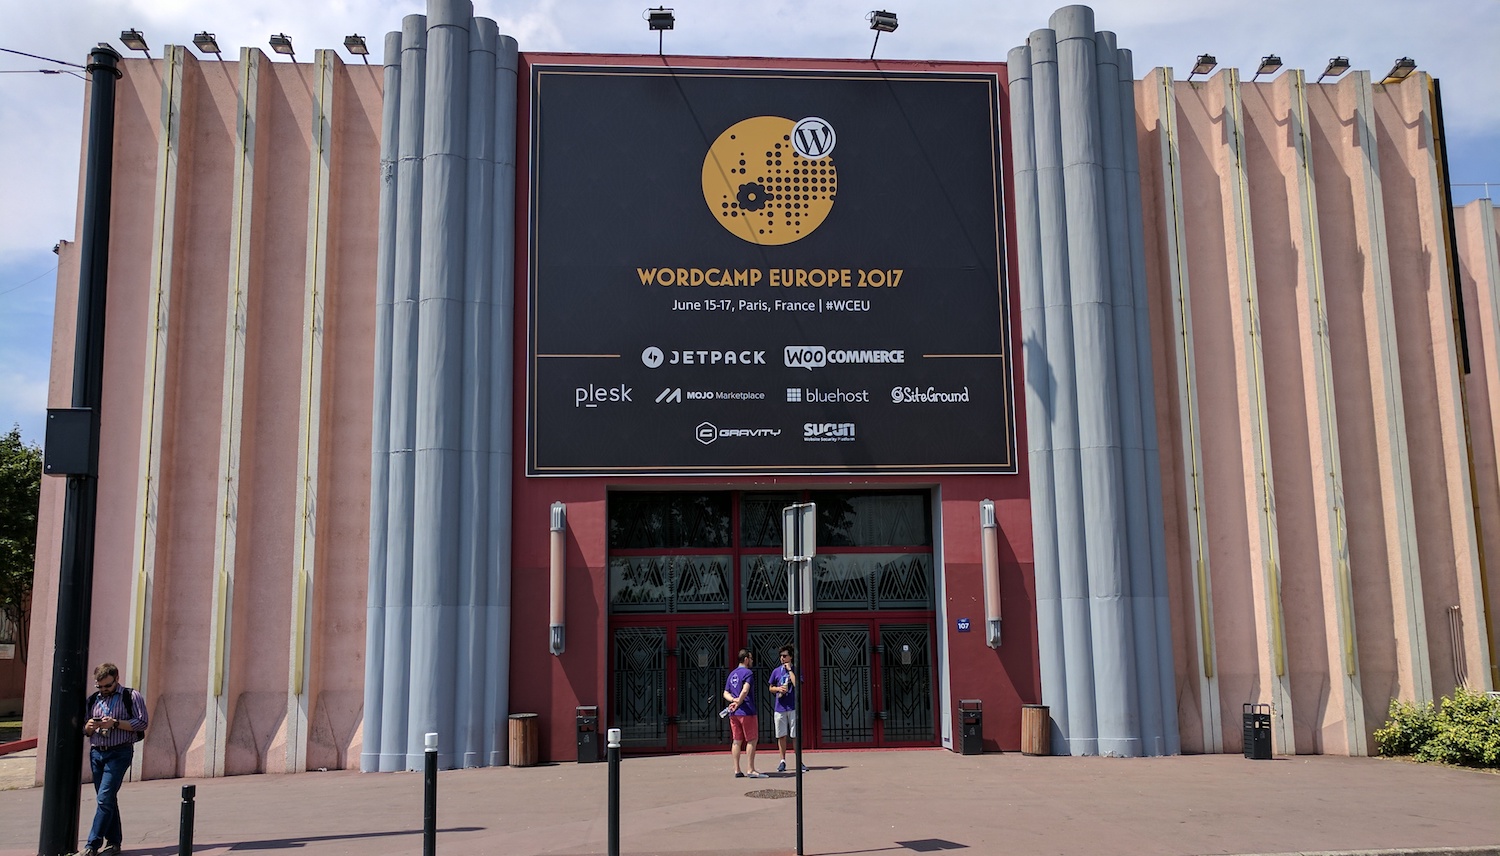 WordCamp Europe 2017 Posts 24% No-Show Rate, Cites Early Ticket Sales and Expensive Location